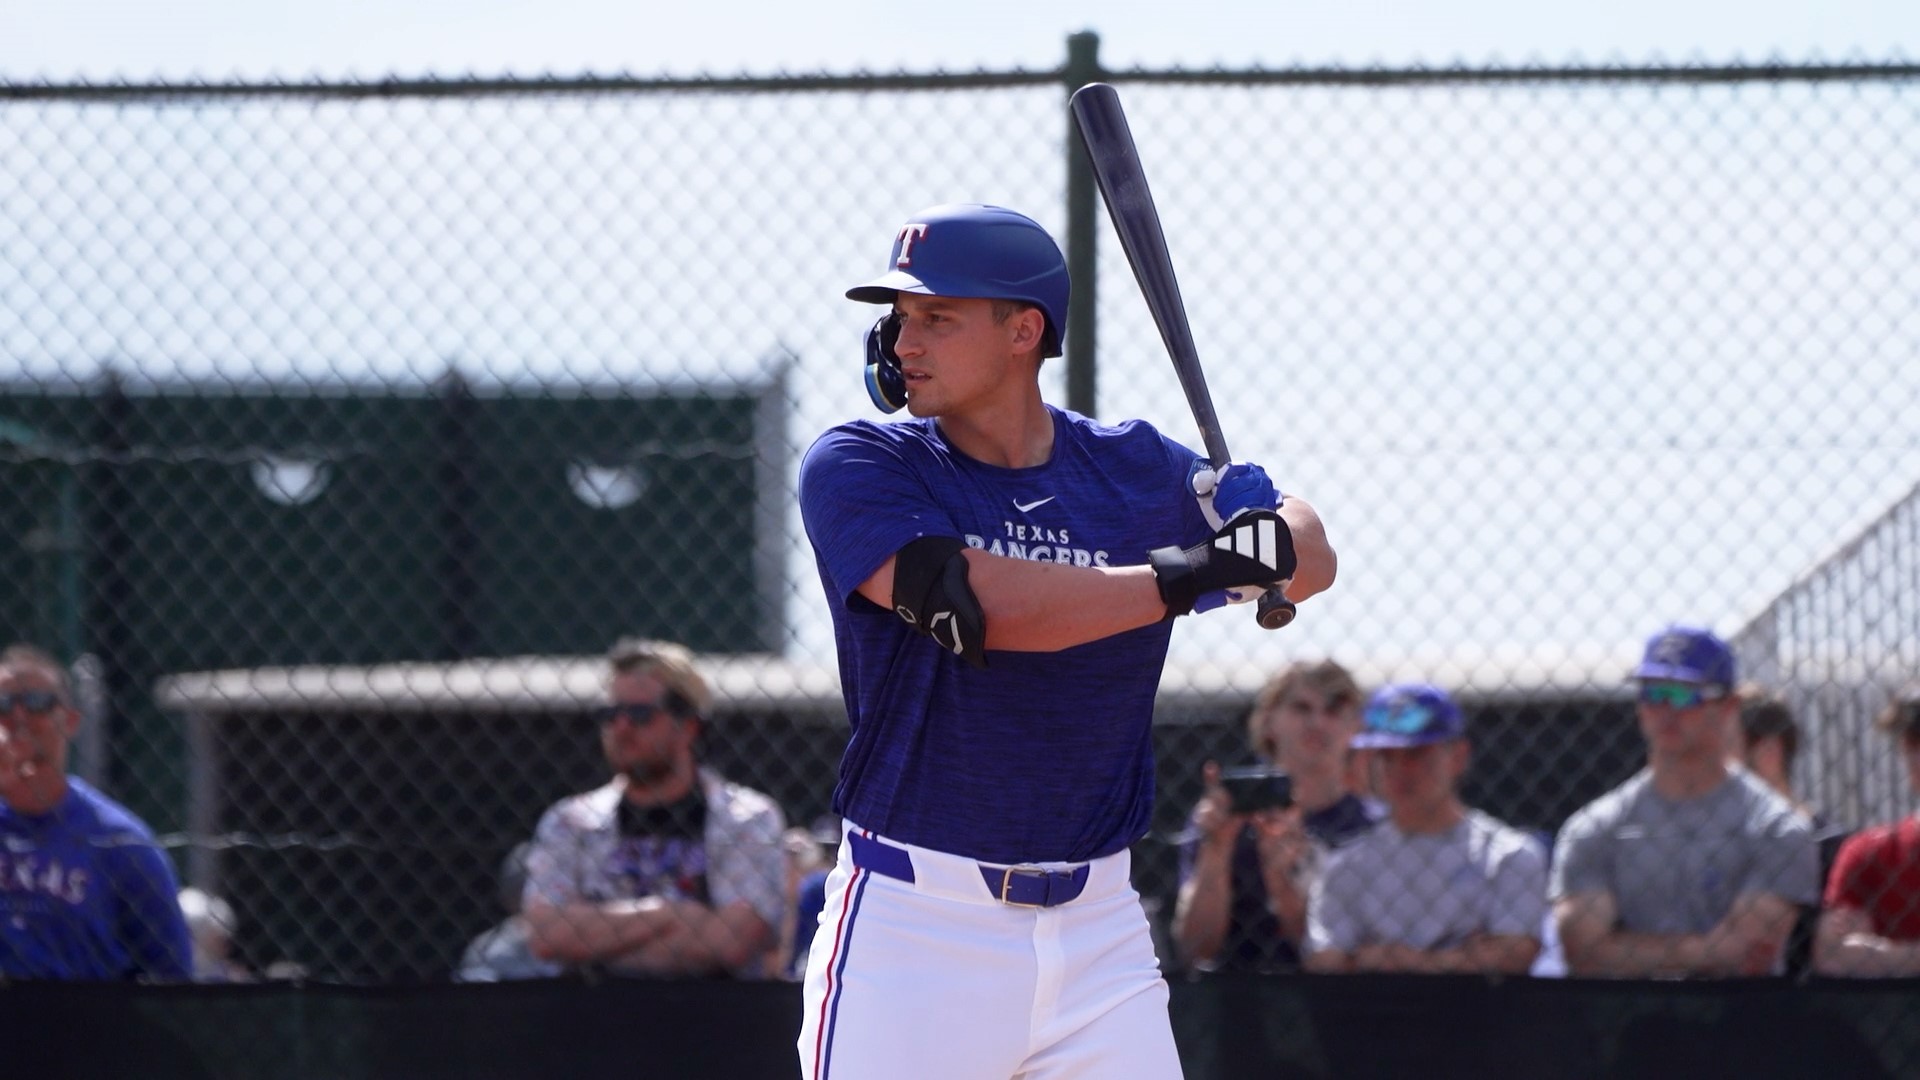 Texas Rangers shortstop Corey Seager is back in action after recovering from offseason hernia surgery.